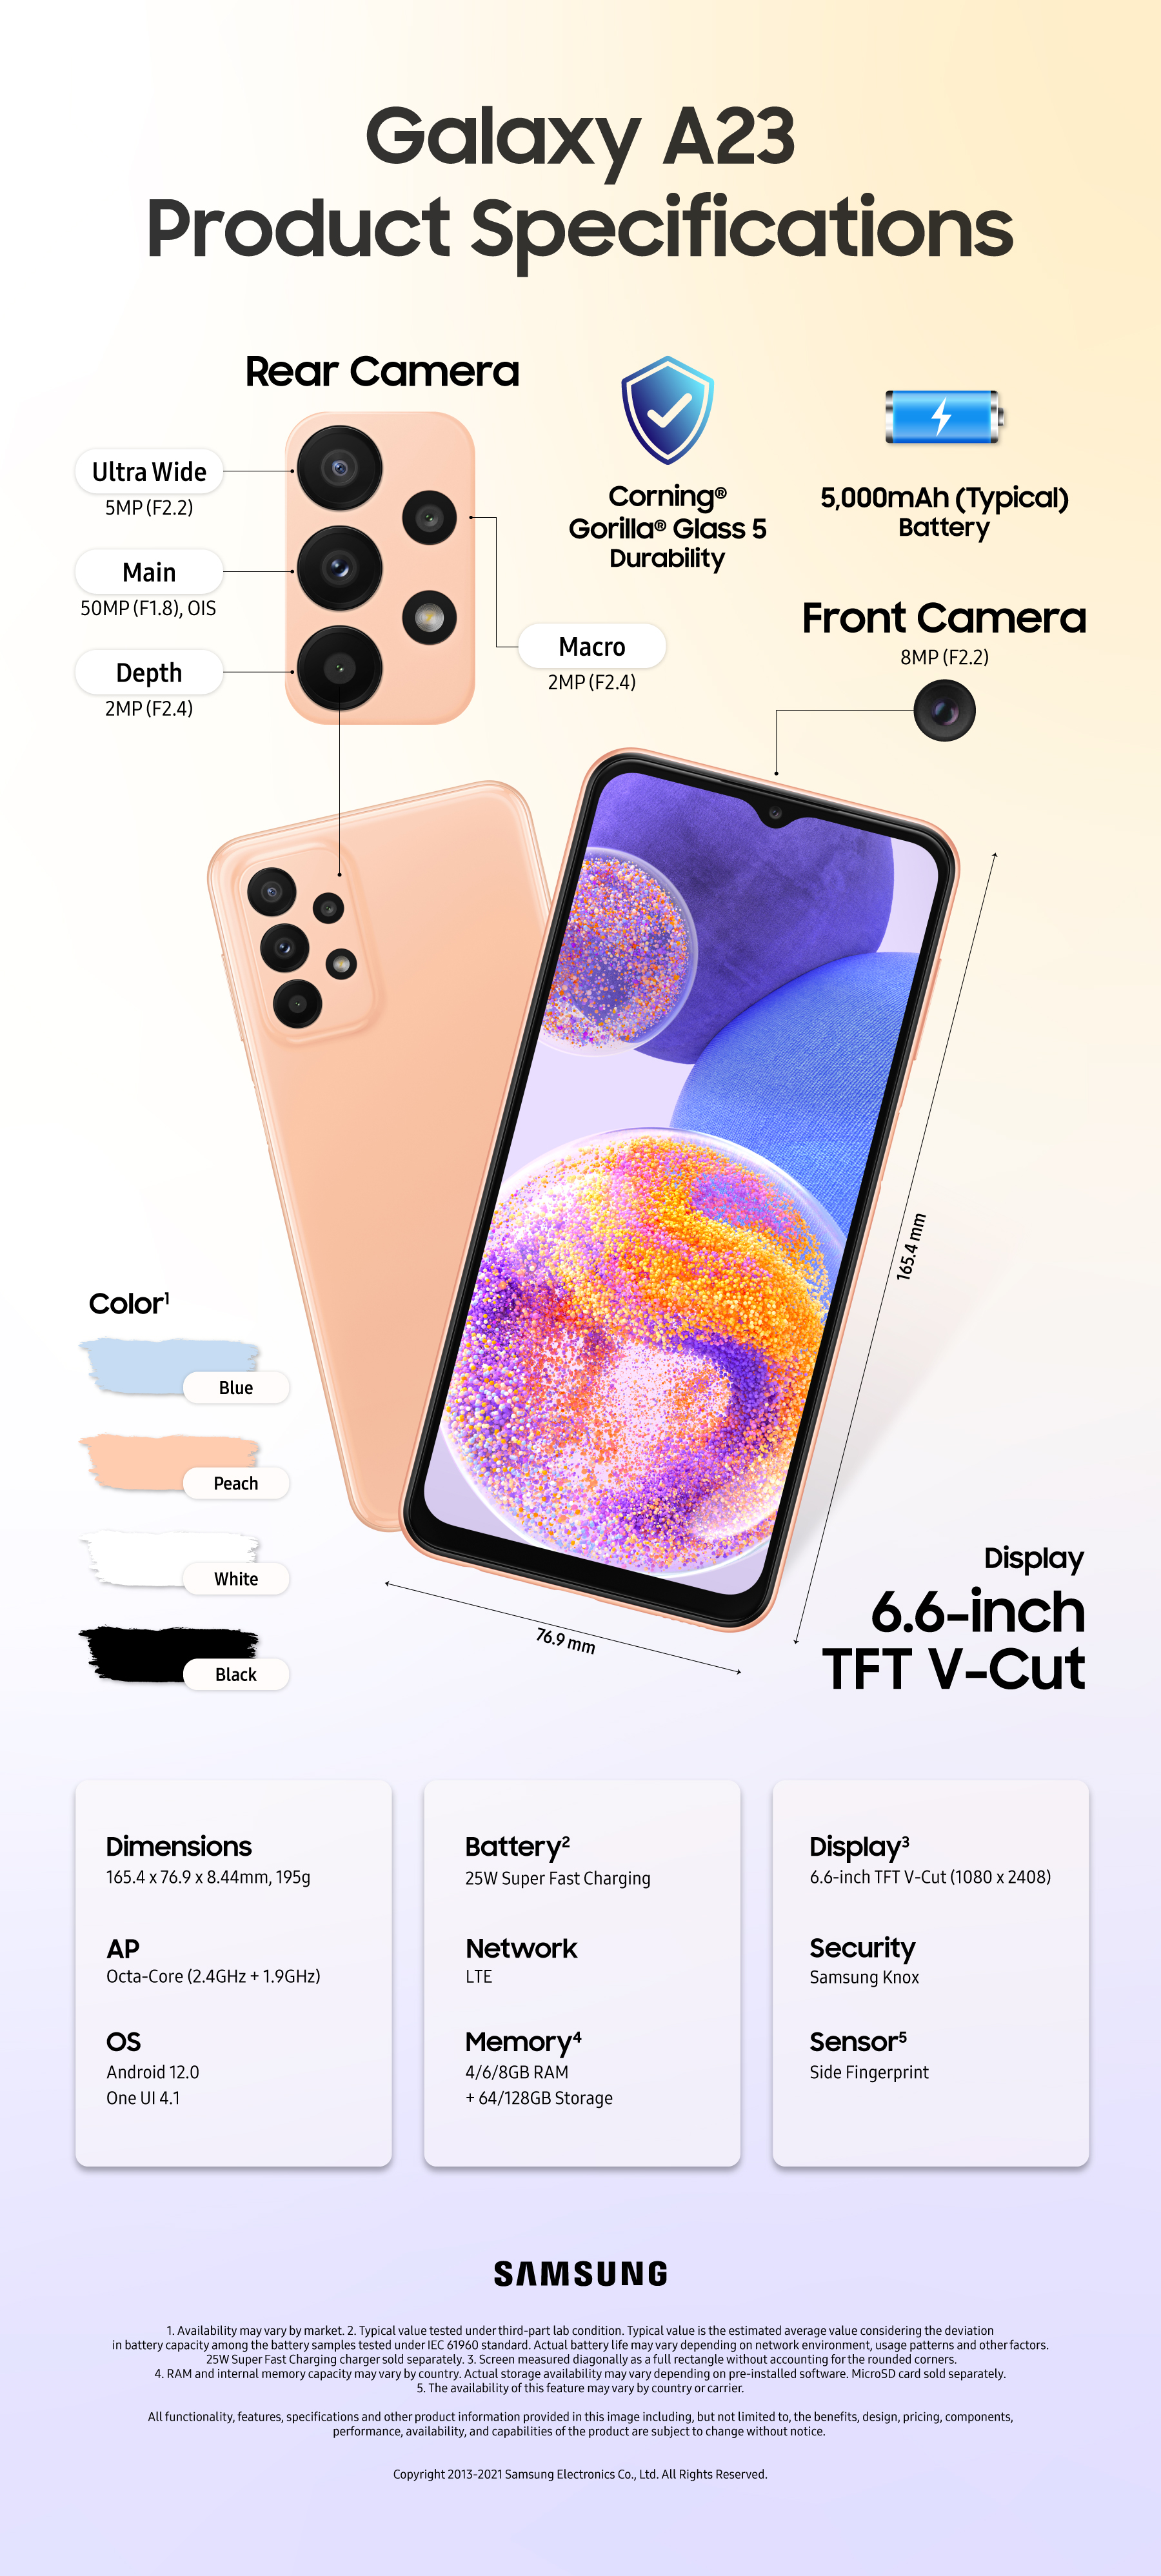 Infographic] Galaxy A23 Brings Users All the Galaxy Innovations They Need  in a Mobile-First World – Samsung Mobile Press